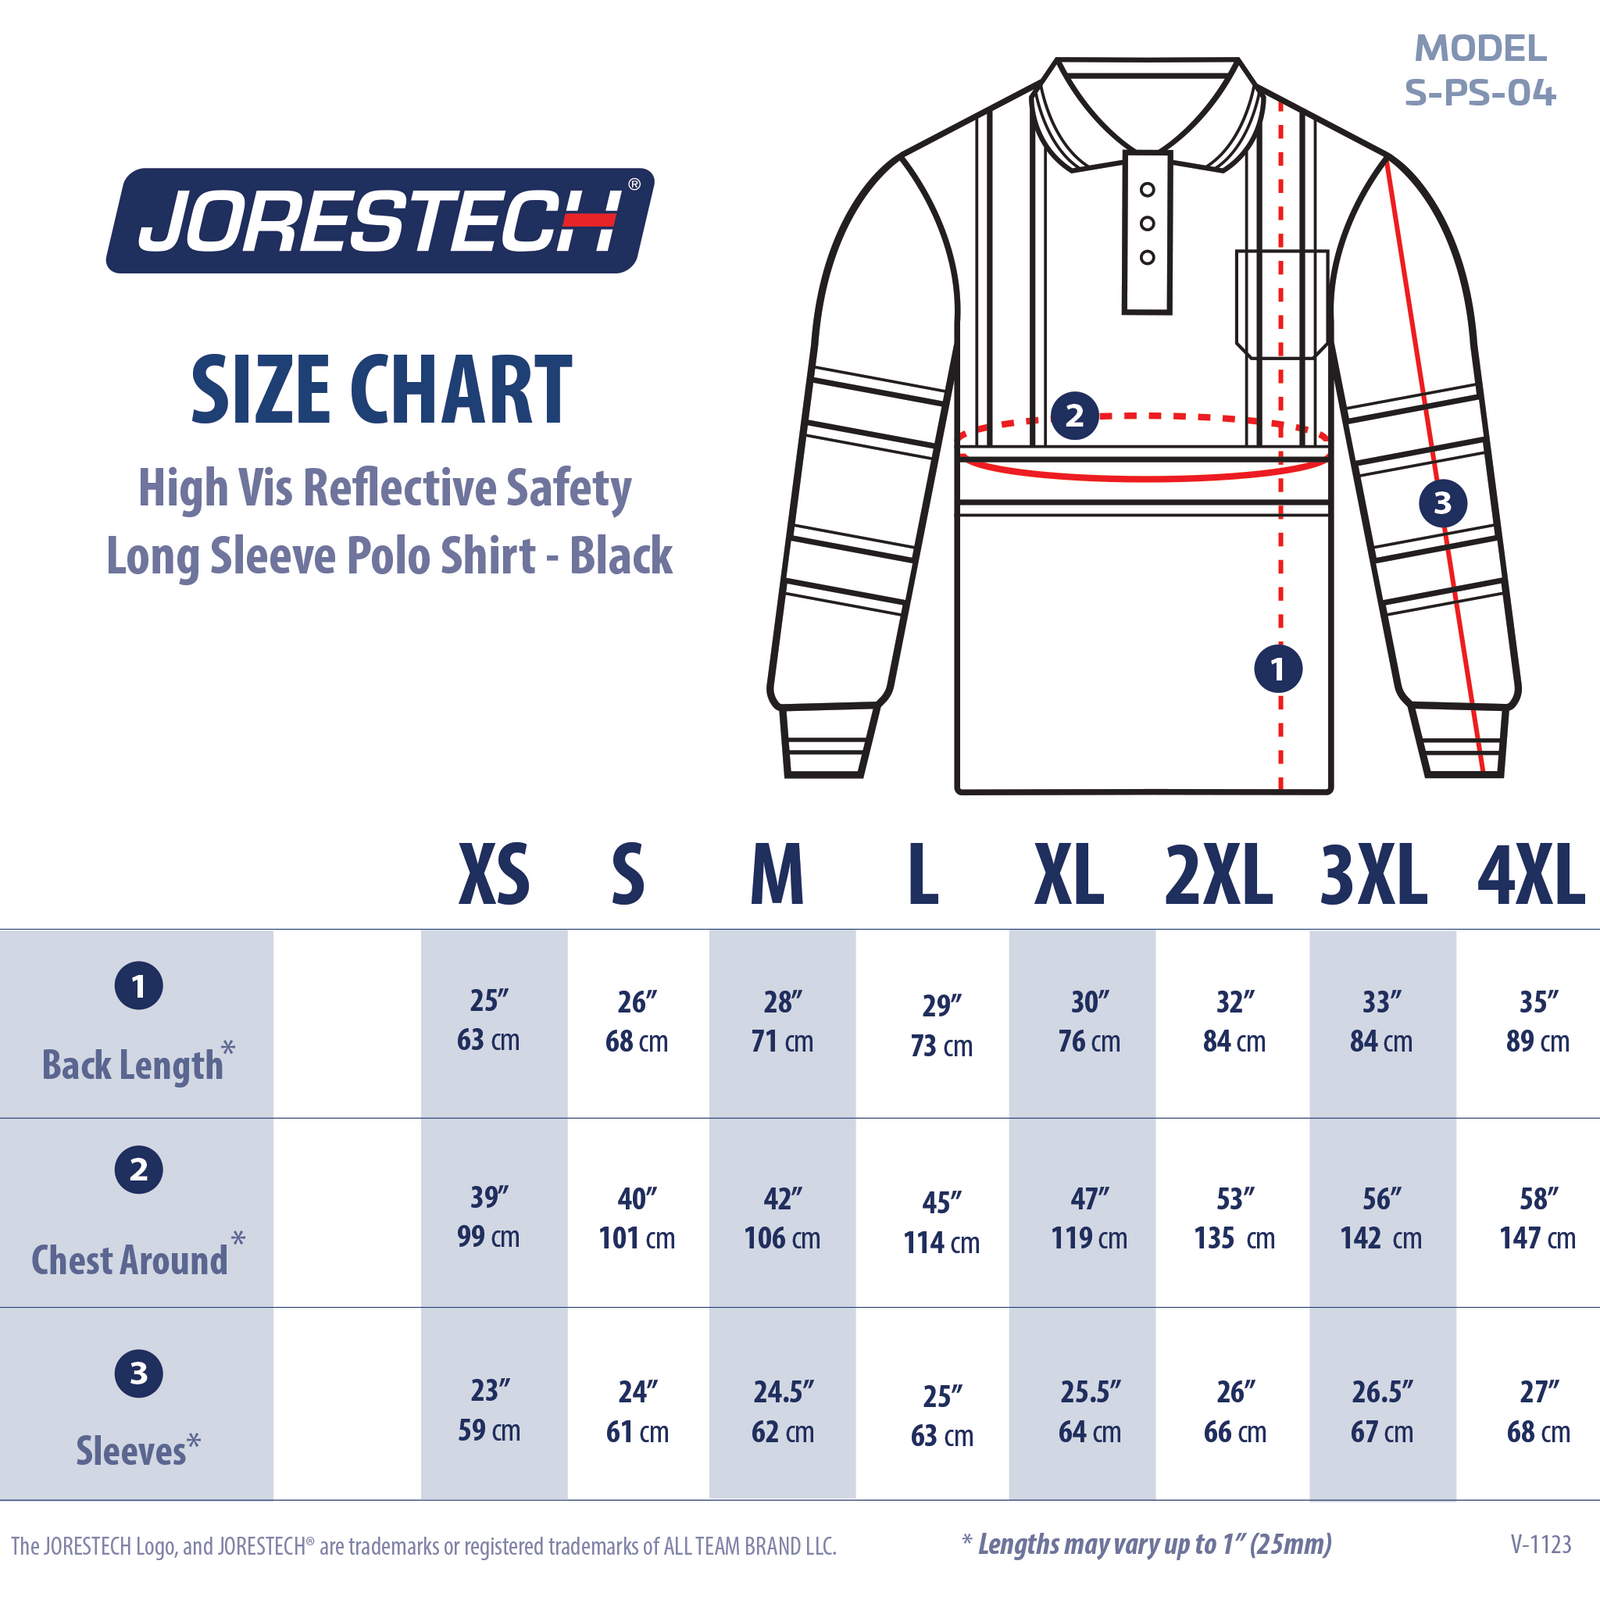 Size chart of the hi vis reflective safety long sleeve polo shirt